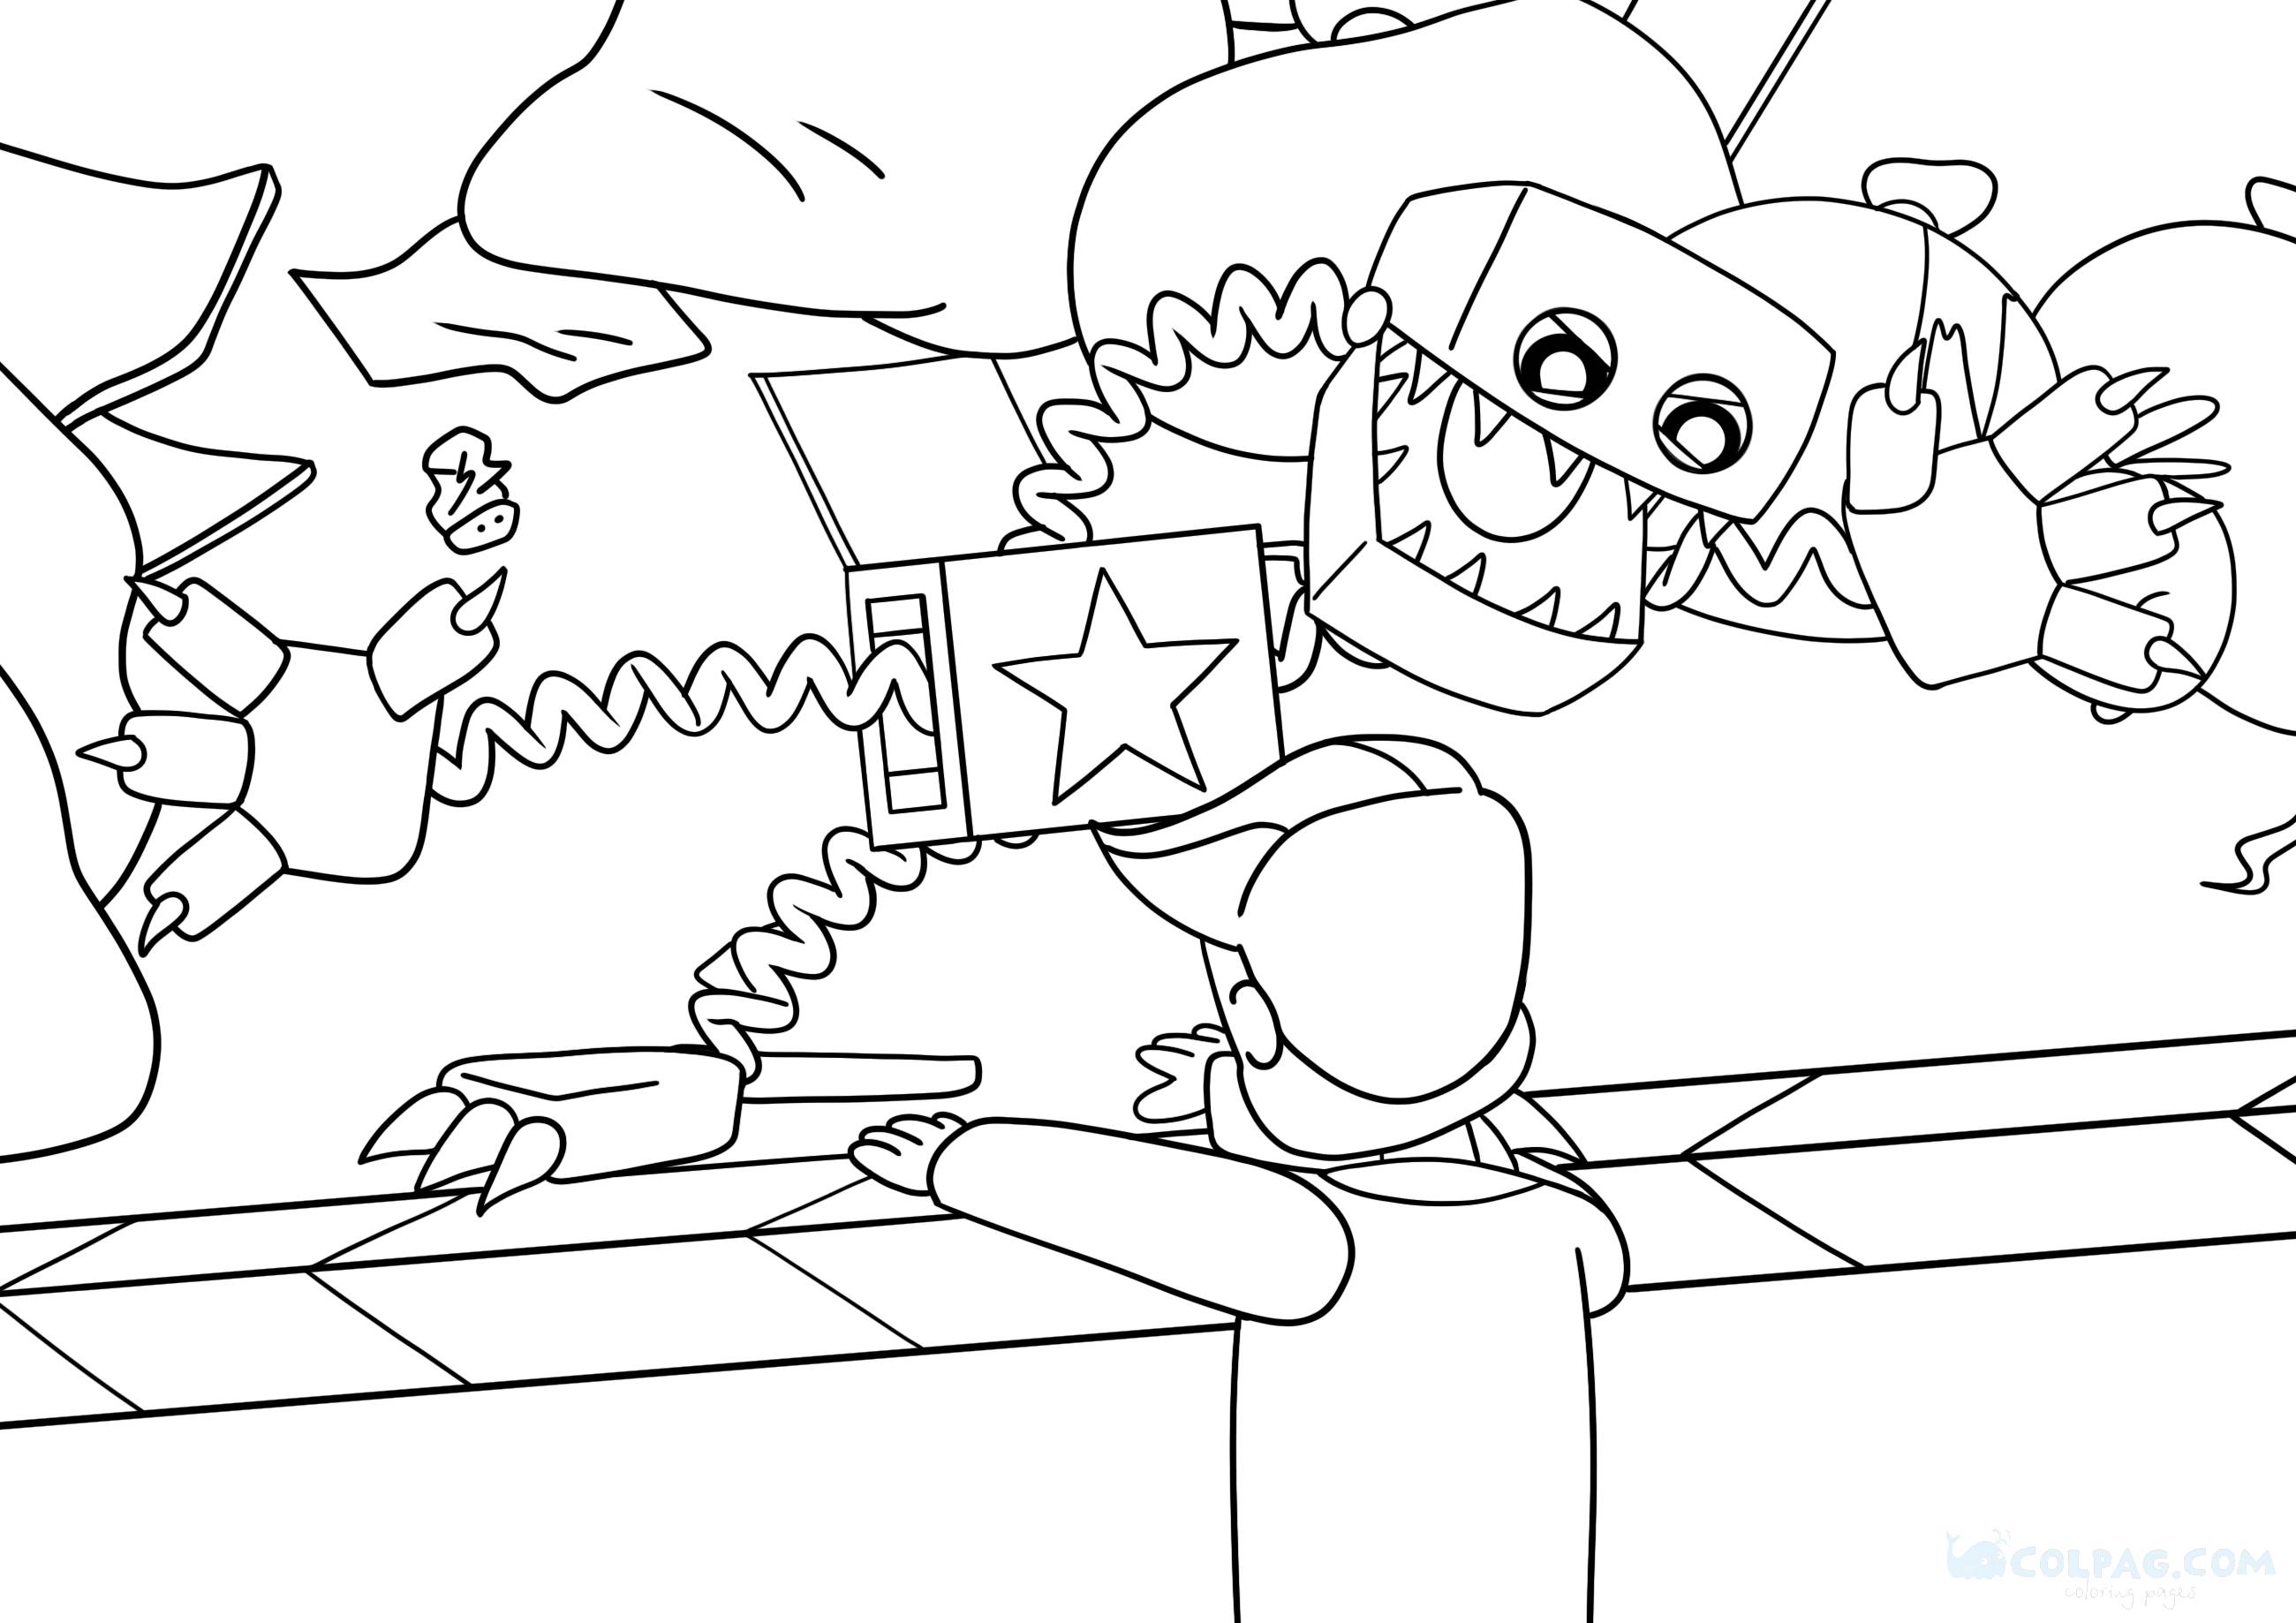 Coloriages de Boxy Boo (Projet: Playtime)